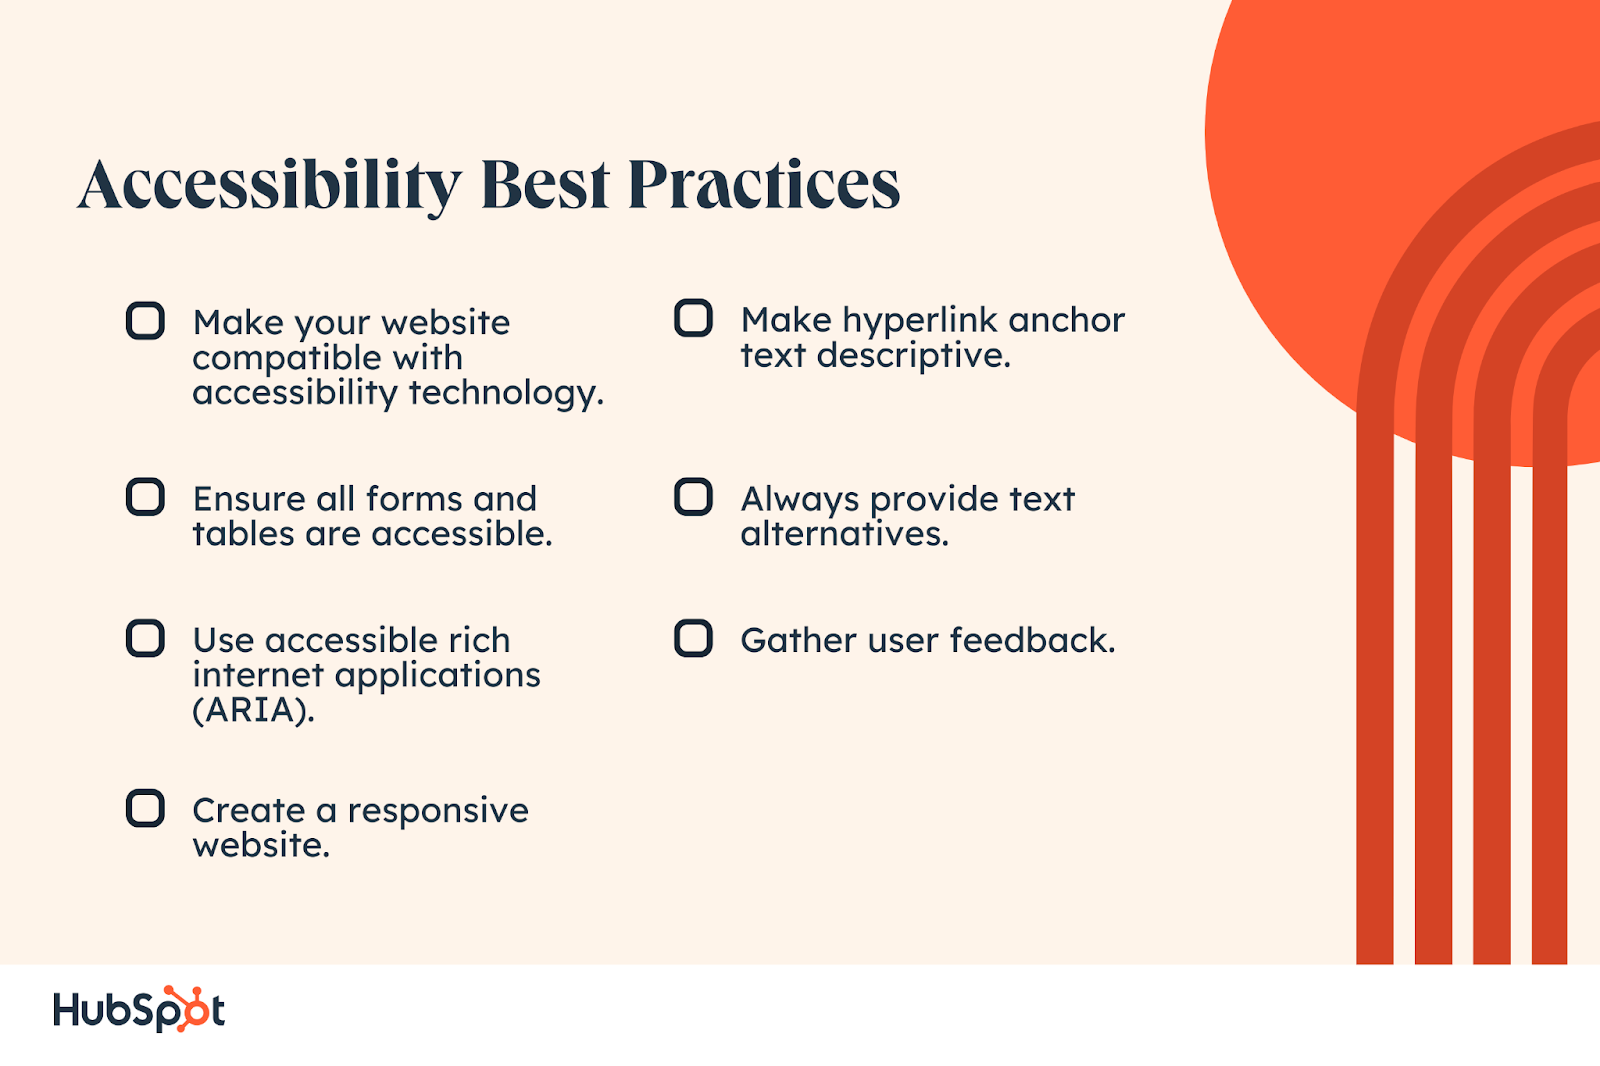 Accessibility Best Practices. Ensure all forms and tables are accessible. Use accessible rich internet applications (ARIA). Create a responsive website. Always provide text alternatives. Gather user feedback. Make your website compatible with accessibility technology. Make hyperlink anchor text descriptive.